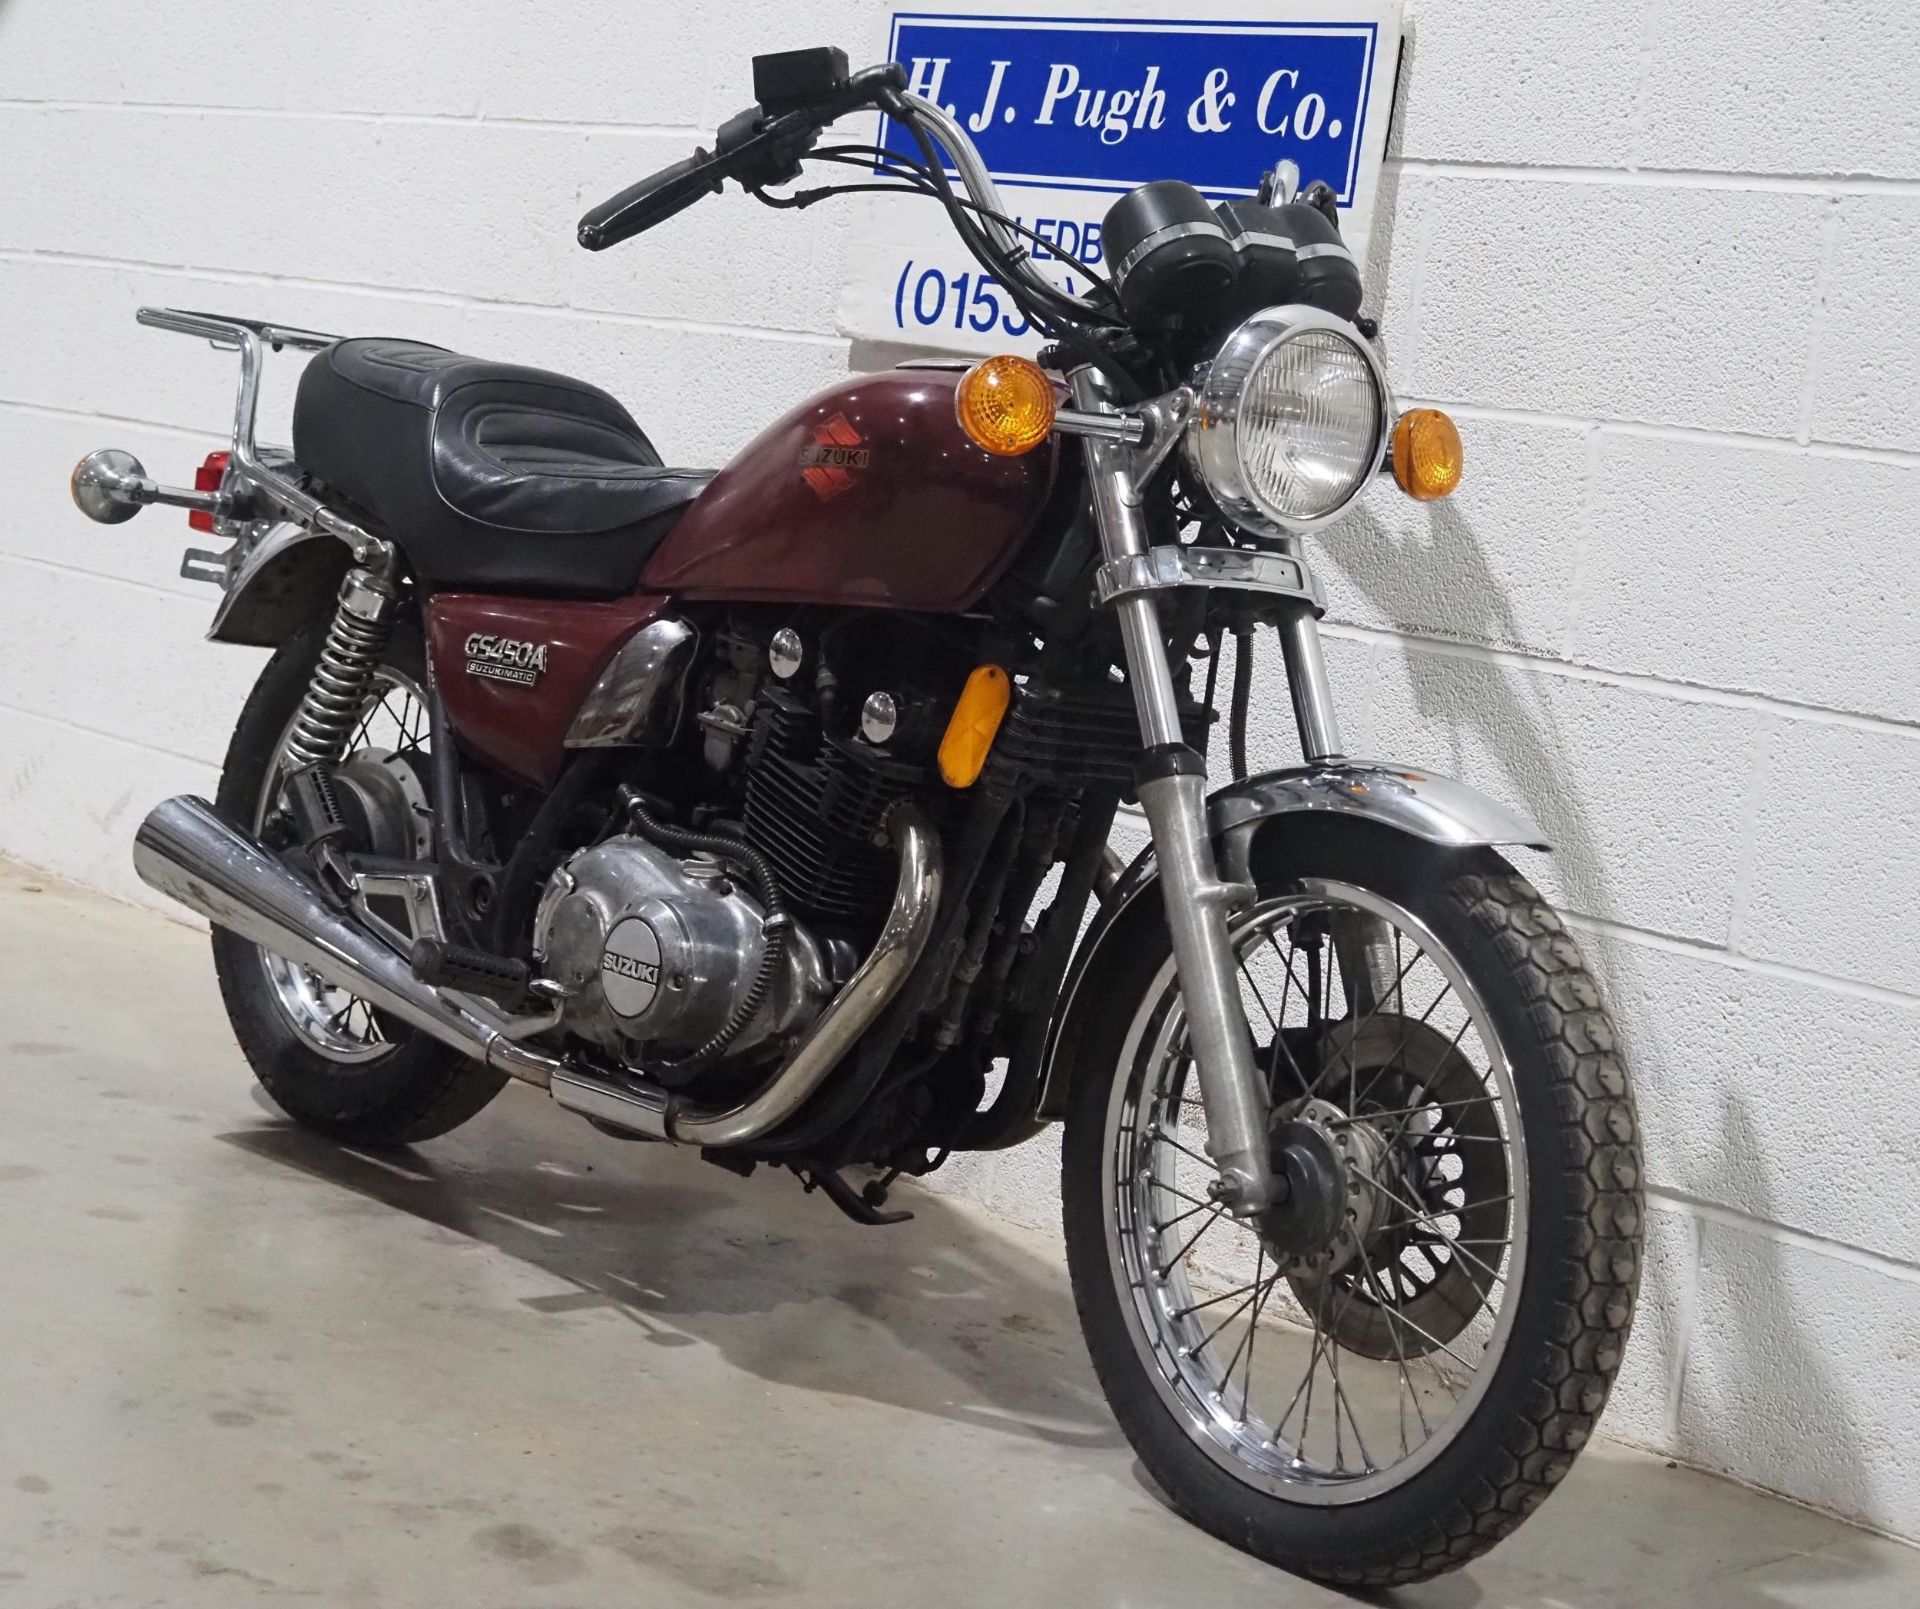 Suzuki GS450 motorcycle. Runs but will require recommissioning. Import. Come with Nova document. - Image 2 of 6